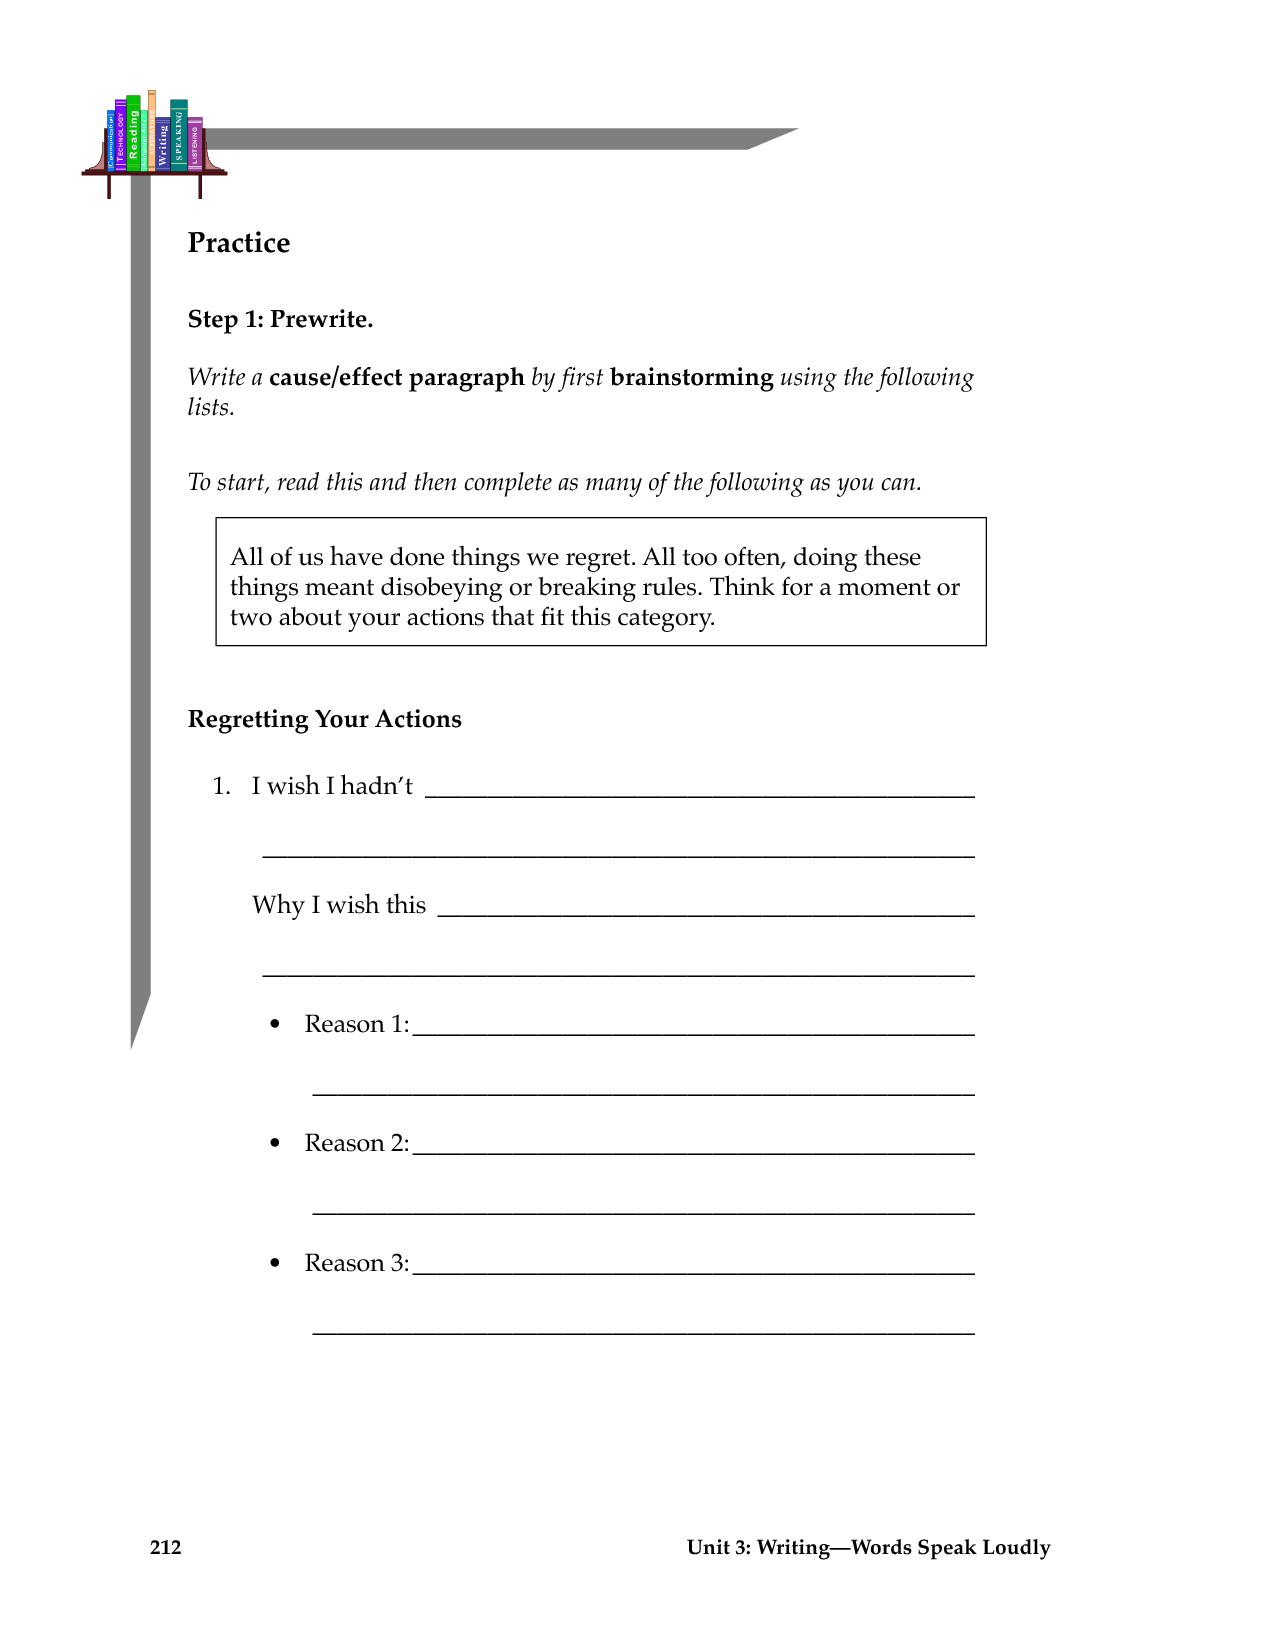 19 Best Images of Brainstorming Technology Worksheets - Topic